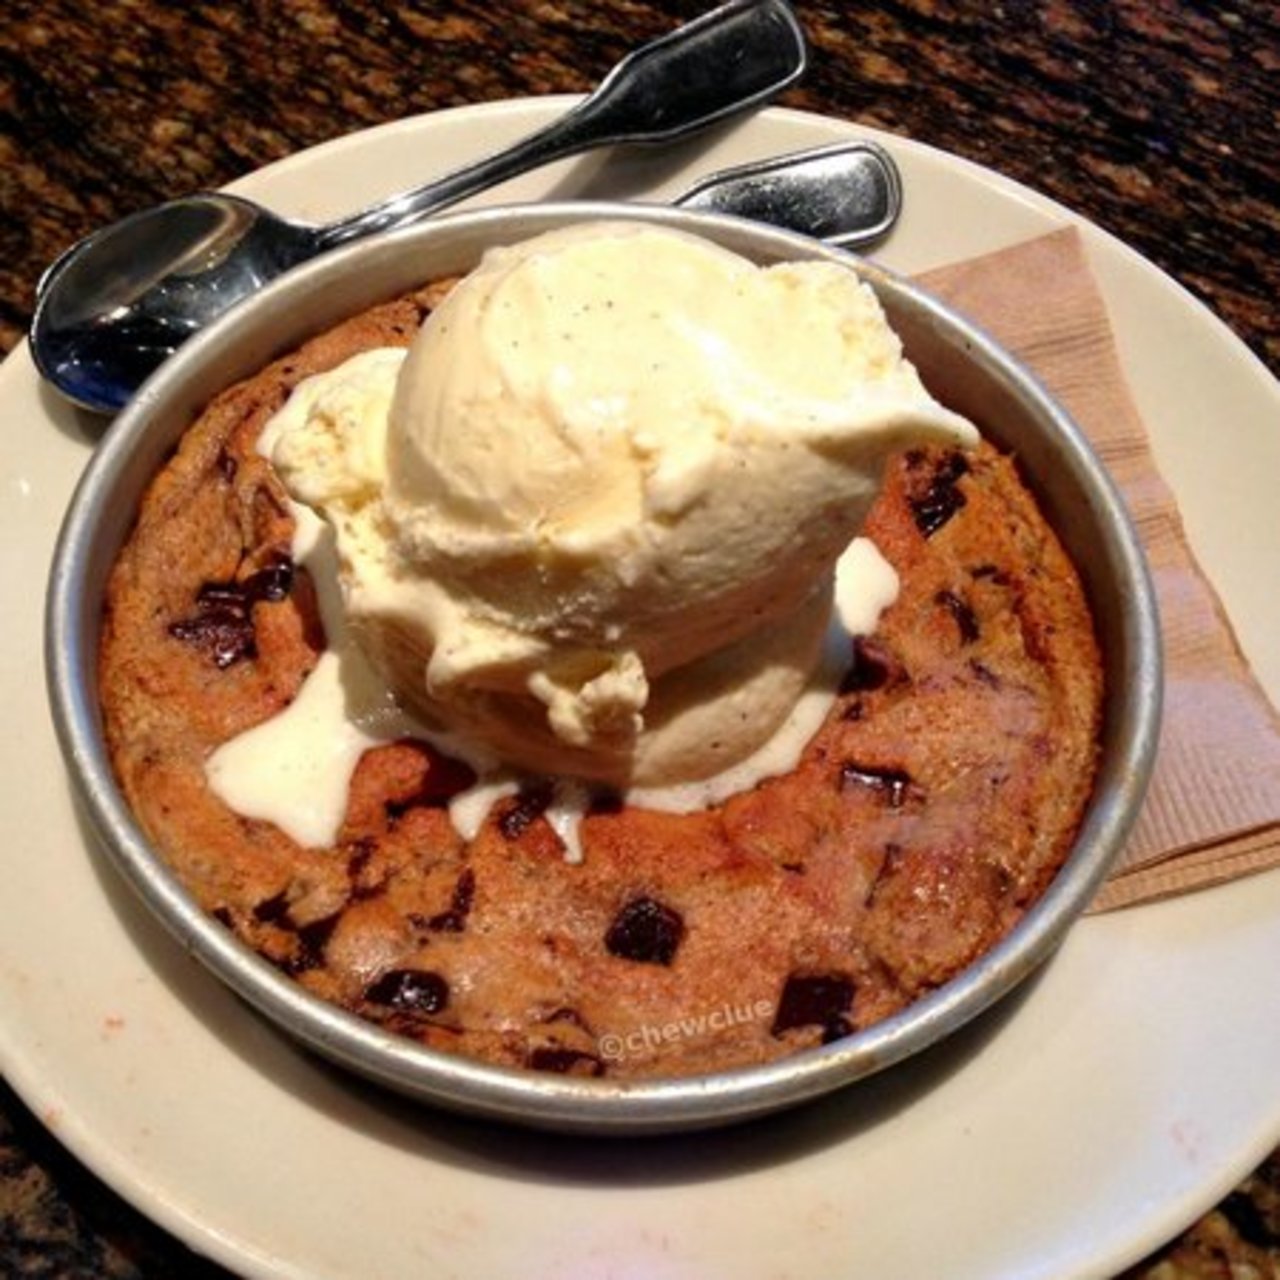 BJ's Famous Chocolate Chunk Pizookie